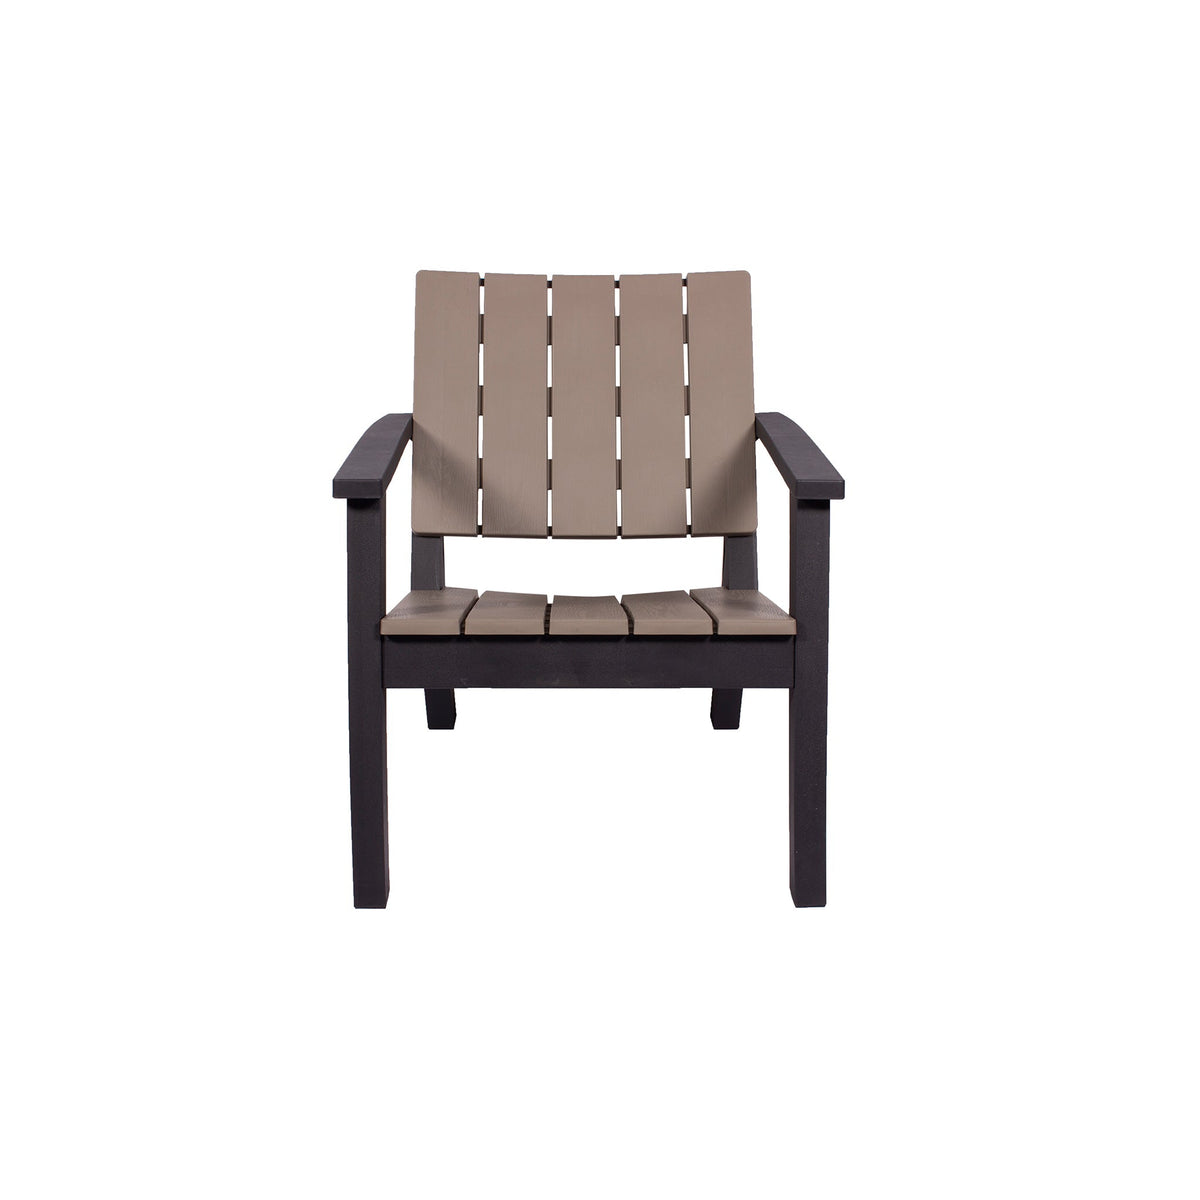 Faro 2 Seater Bistro Set with Coffee Table Wood Grain Effect